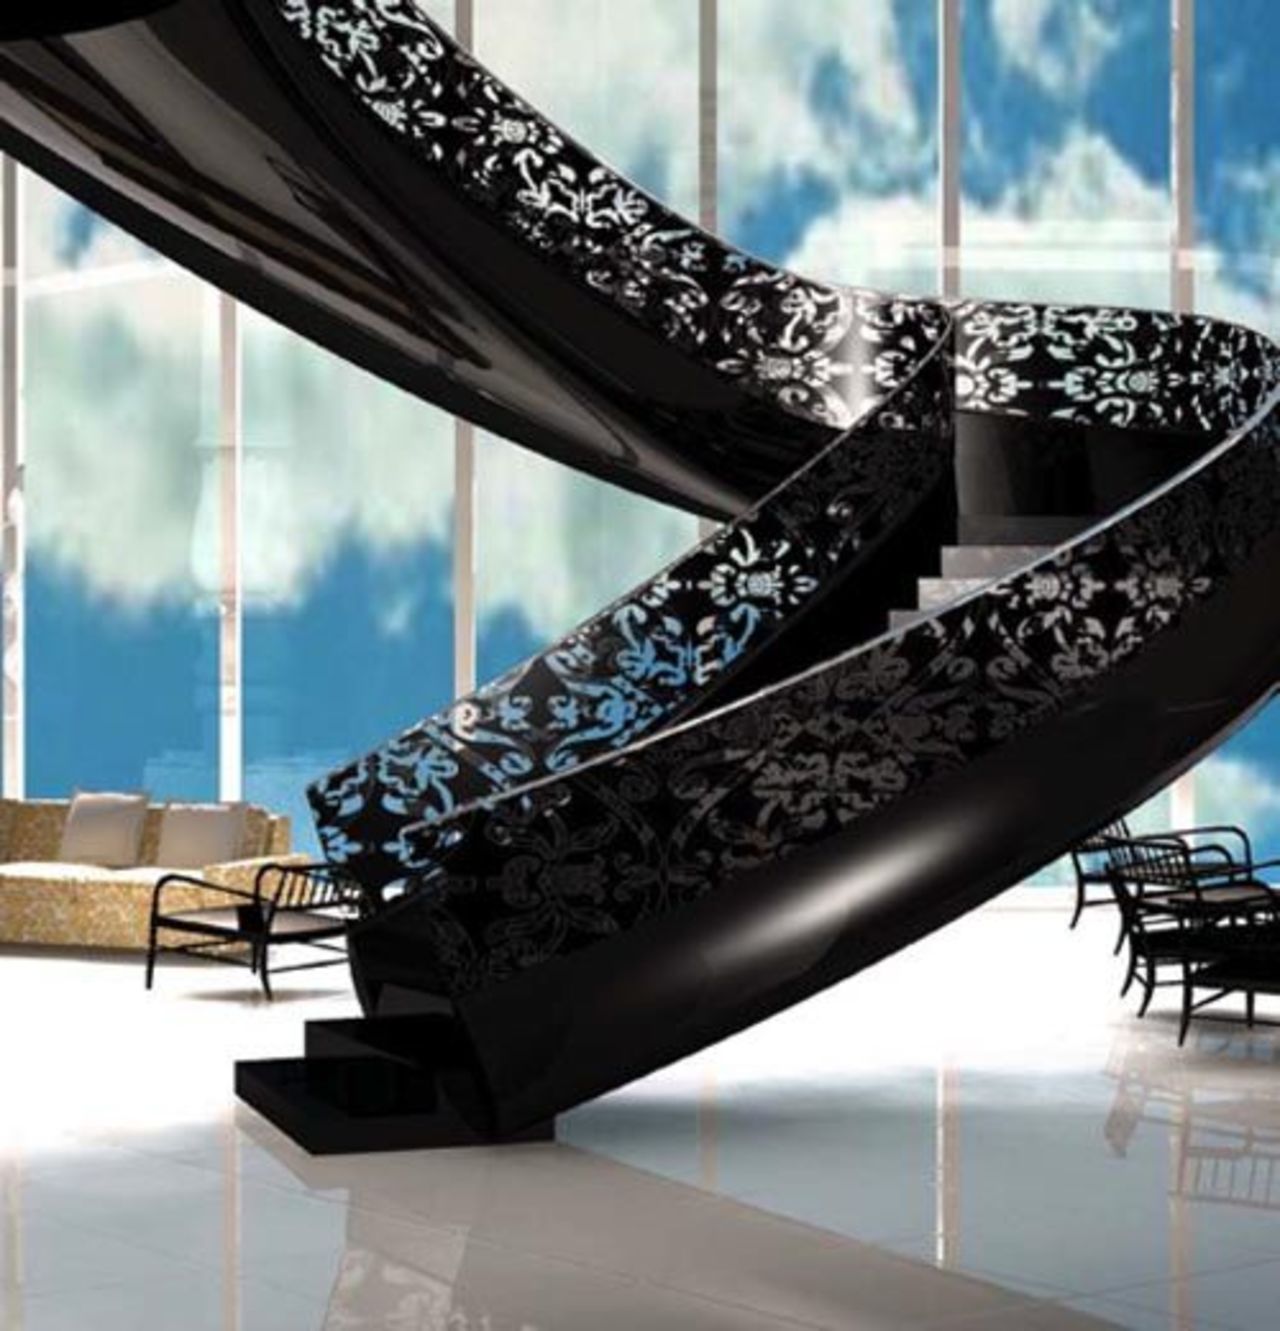 #Amazing #Black #StaircasePlease RT: http://www.housedecoratorscollection.com/home-decor/amazing-black-staircase/ https://t.co/rII3ukZcVL